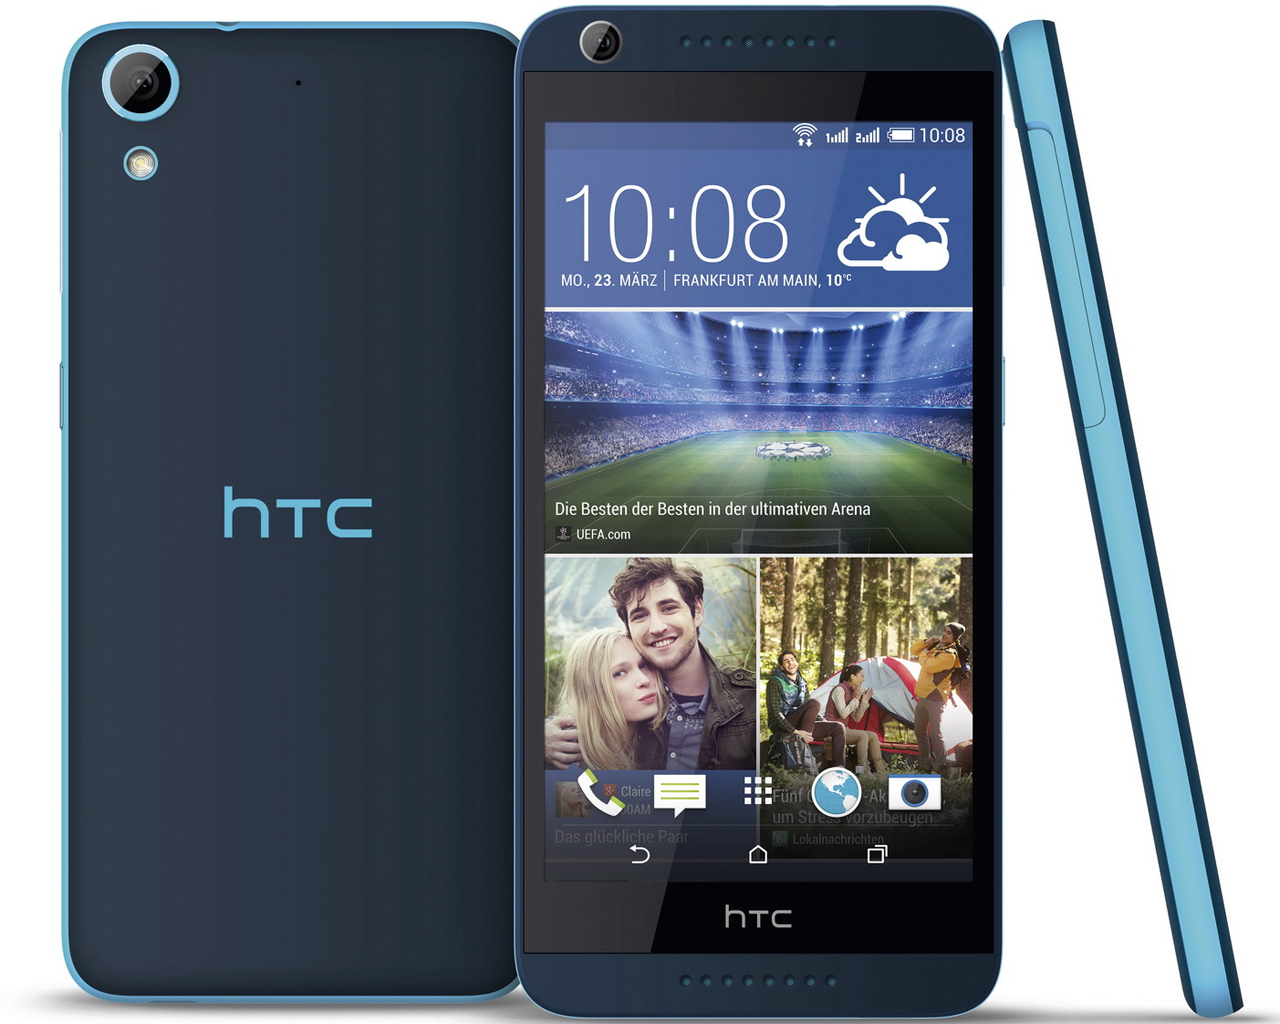 panel forlade fornuft HTC Desire 626G Dual SIM Smartphone Review - NotebookCheck.net Reviews